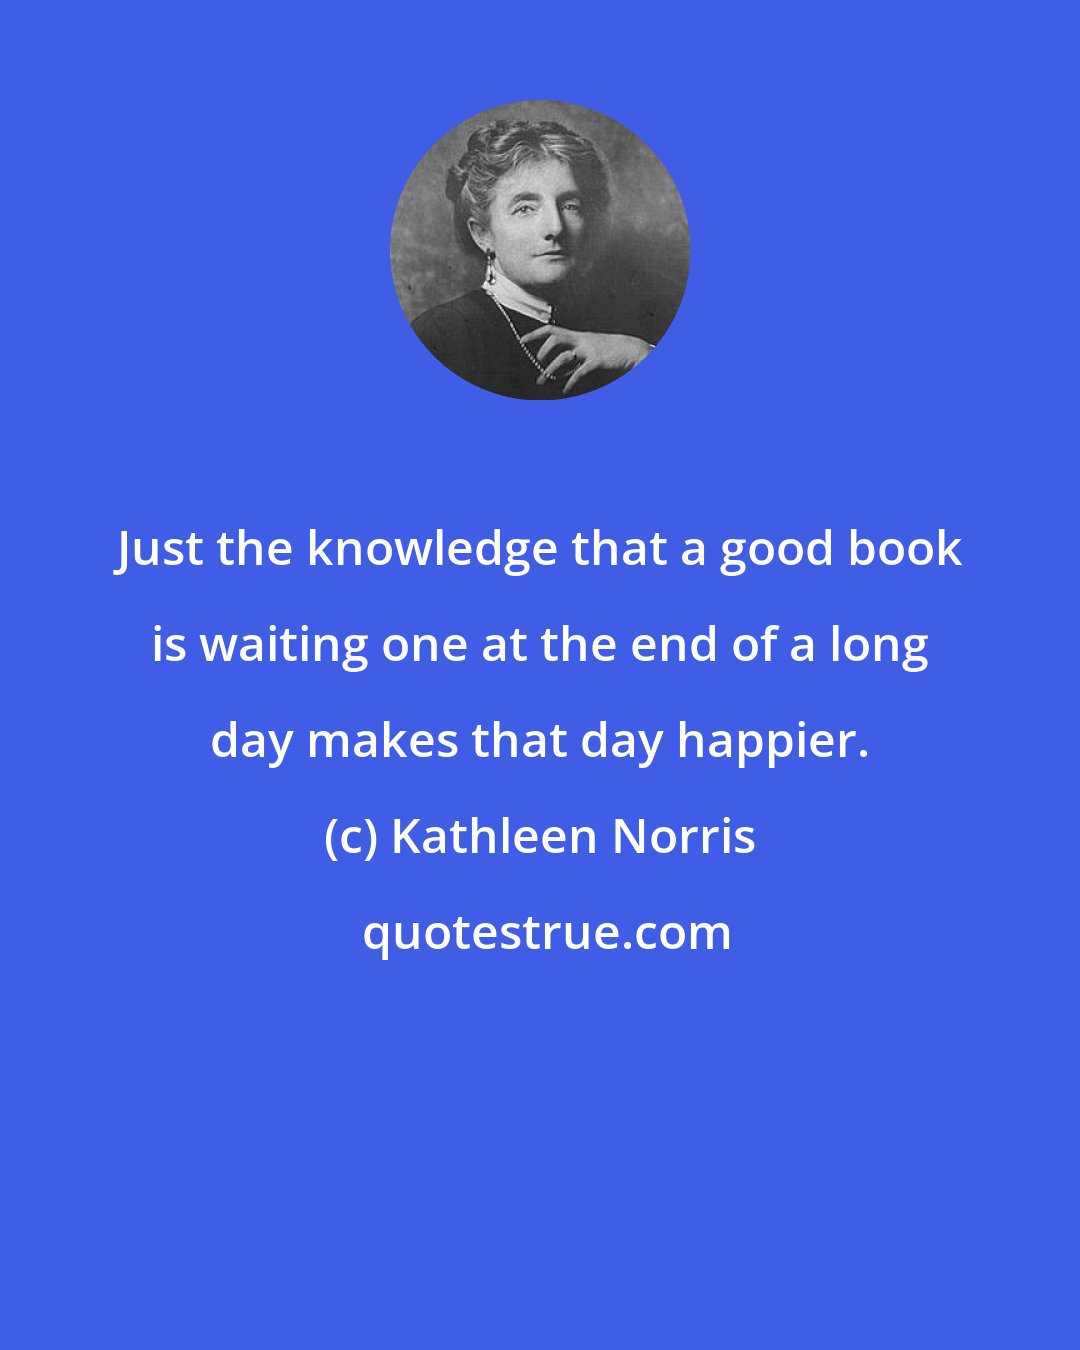 Kathleen Norris: Just the knowledge that a good book is waiting one at the end of a long day makes that day happier.